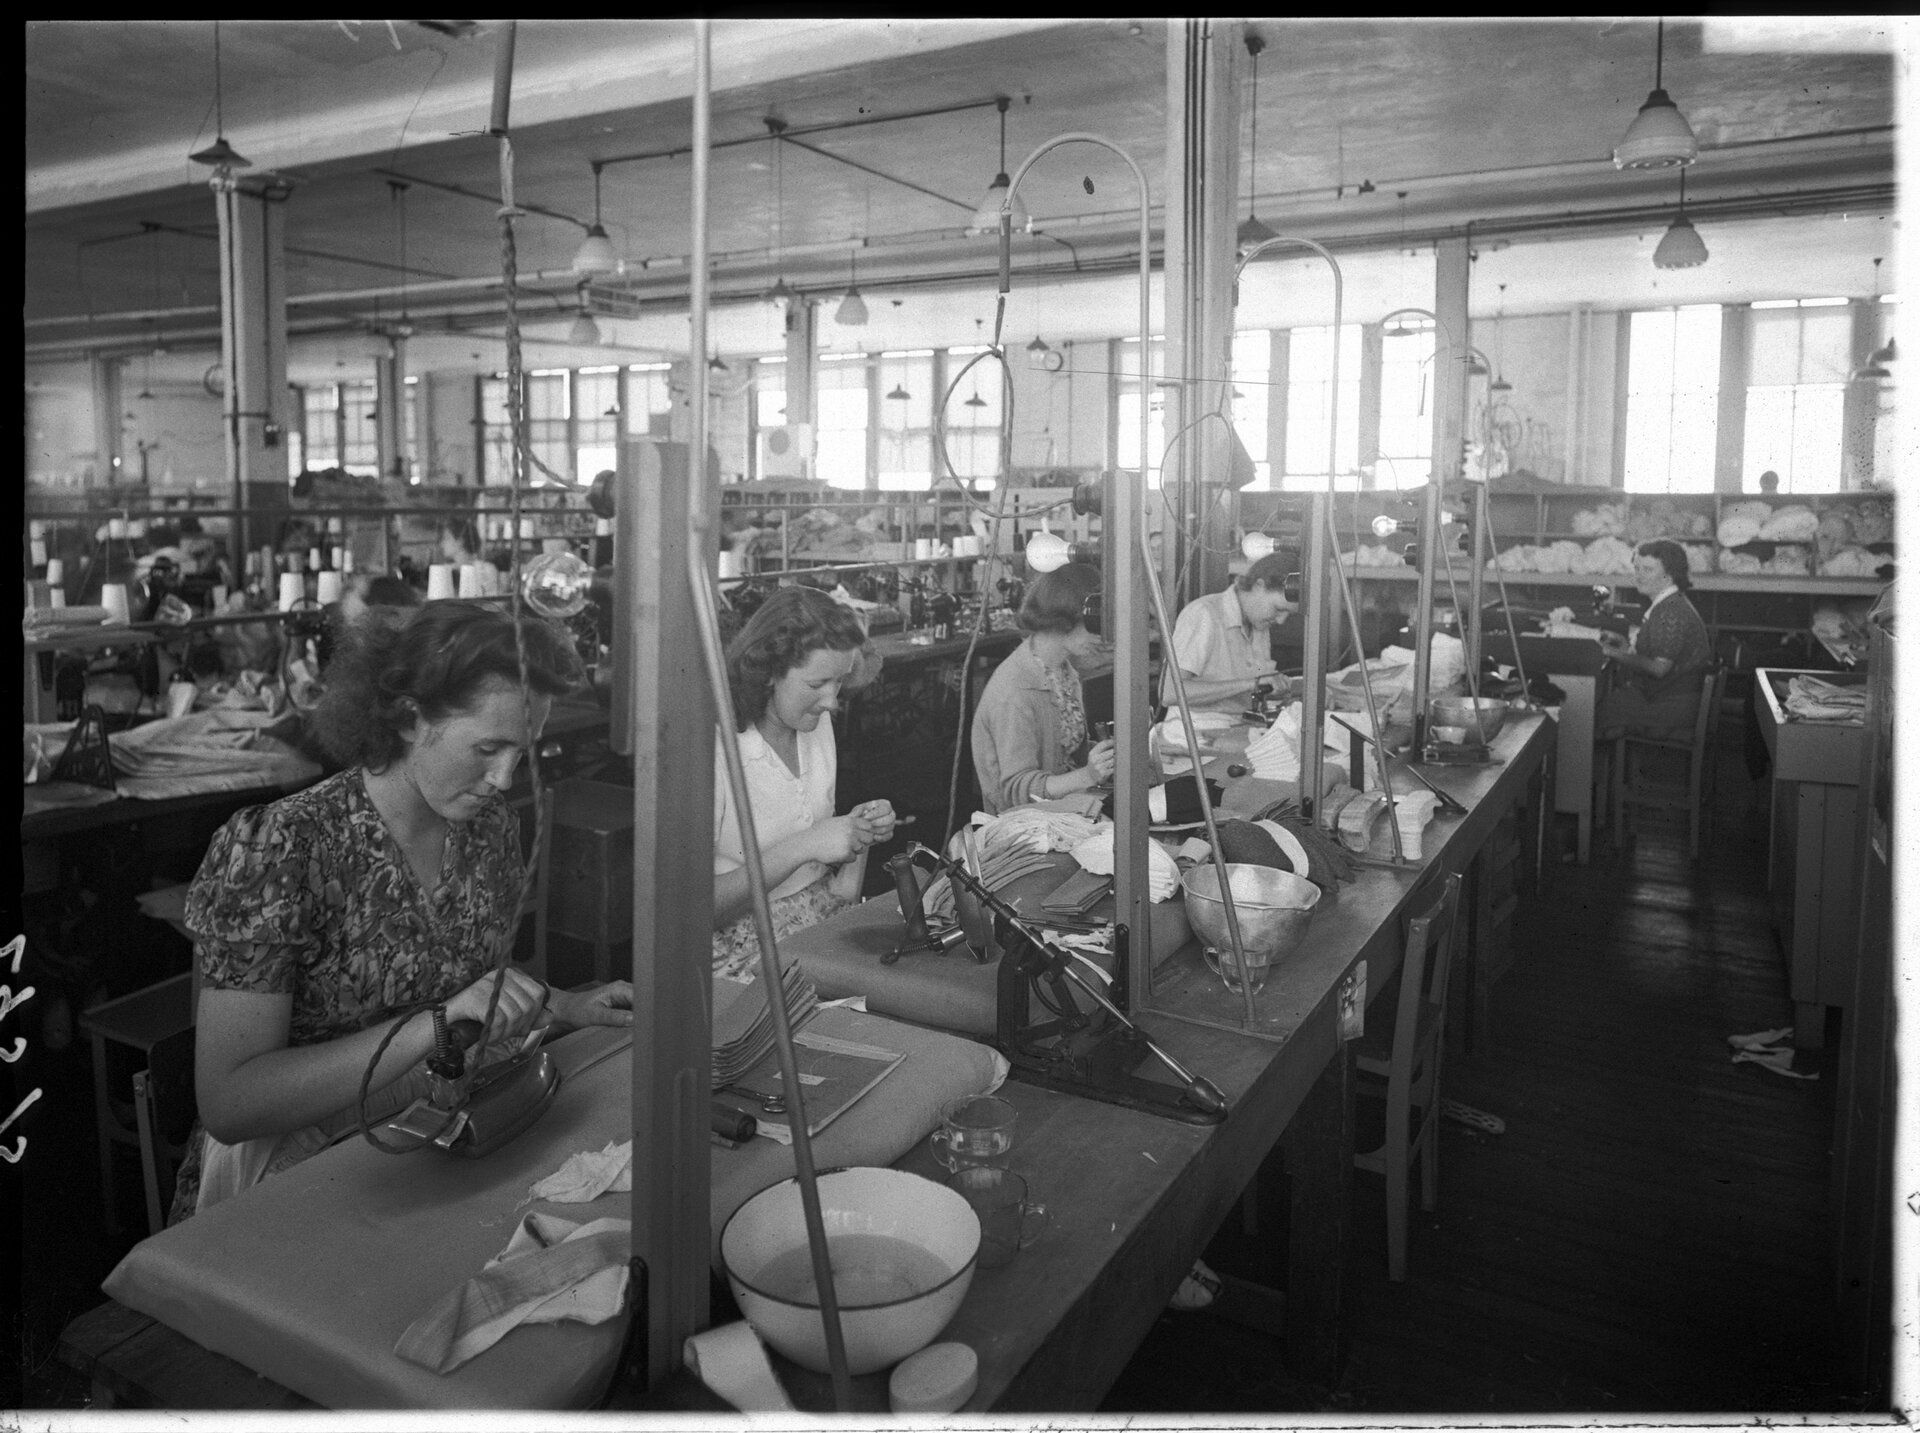 Fabric workshop - female employees working on fabrics at long work benches